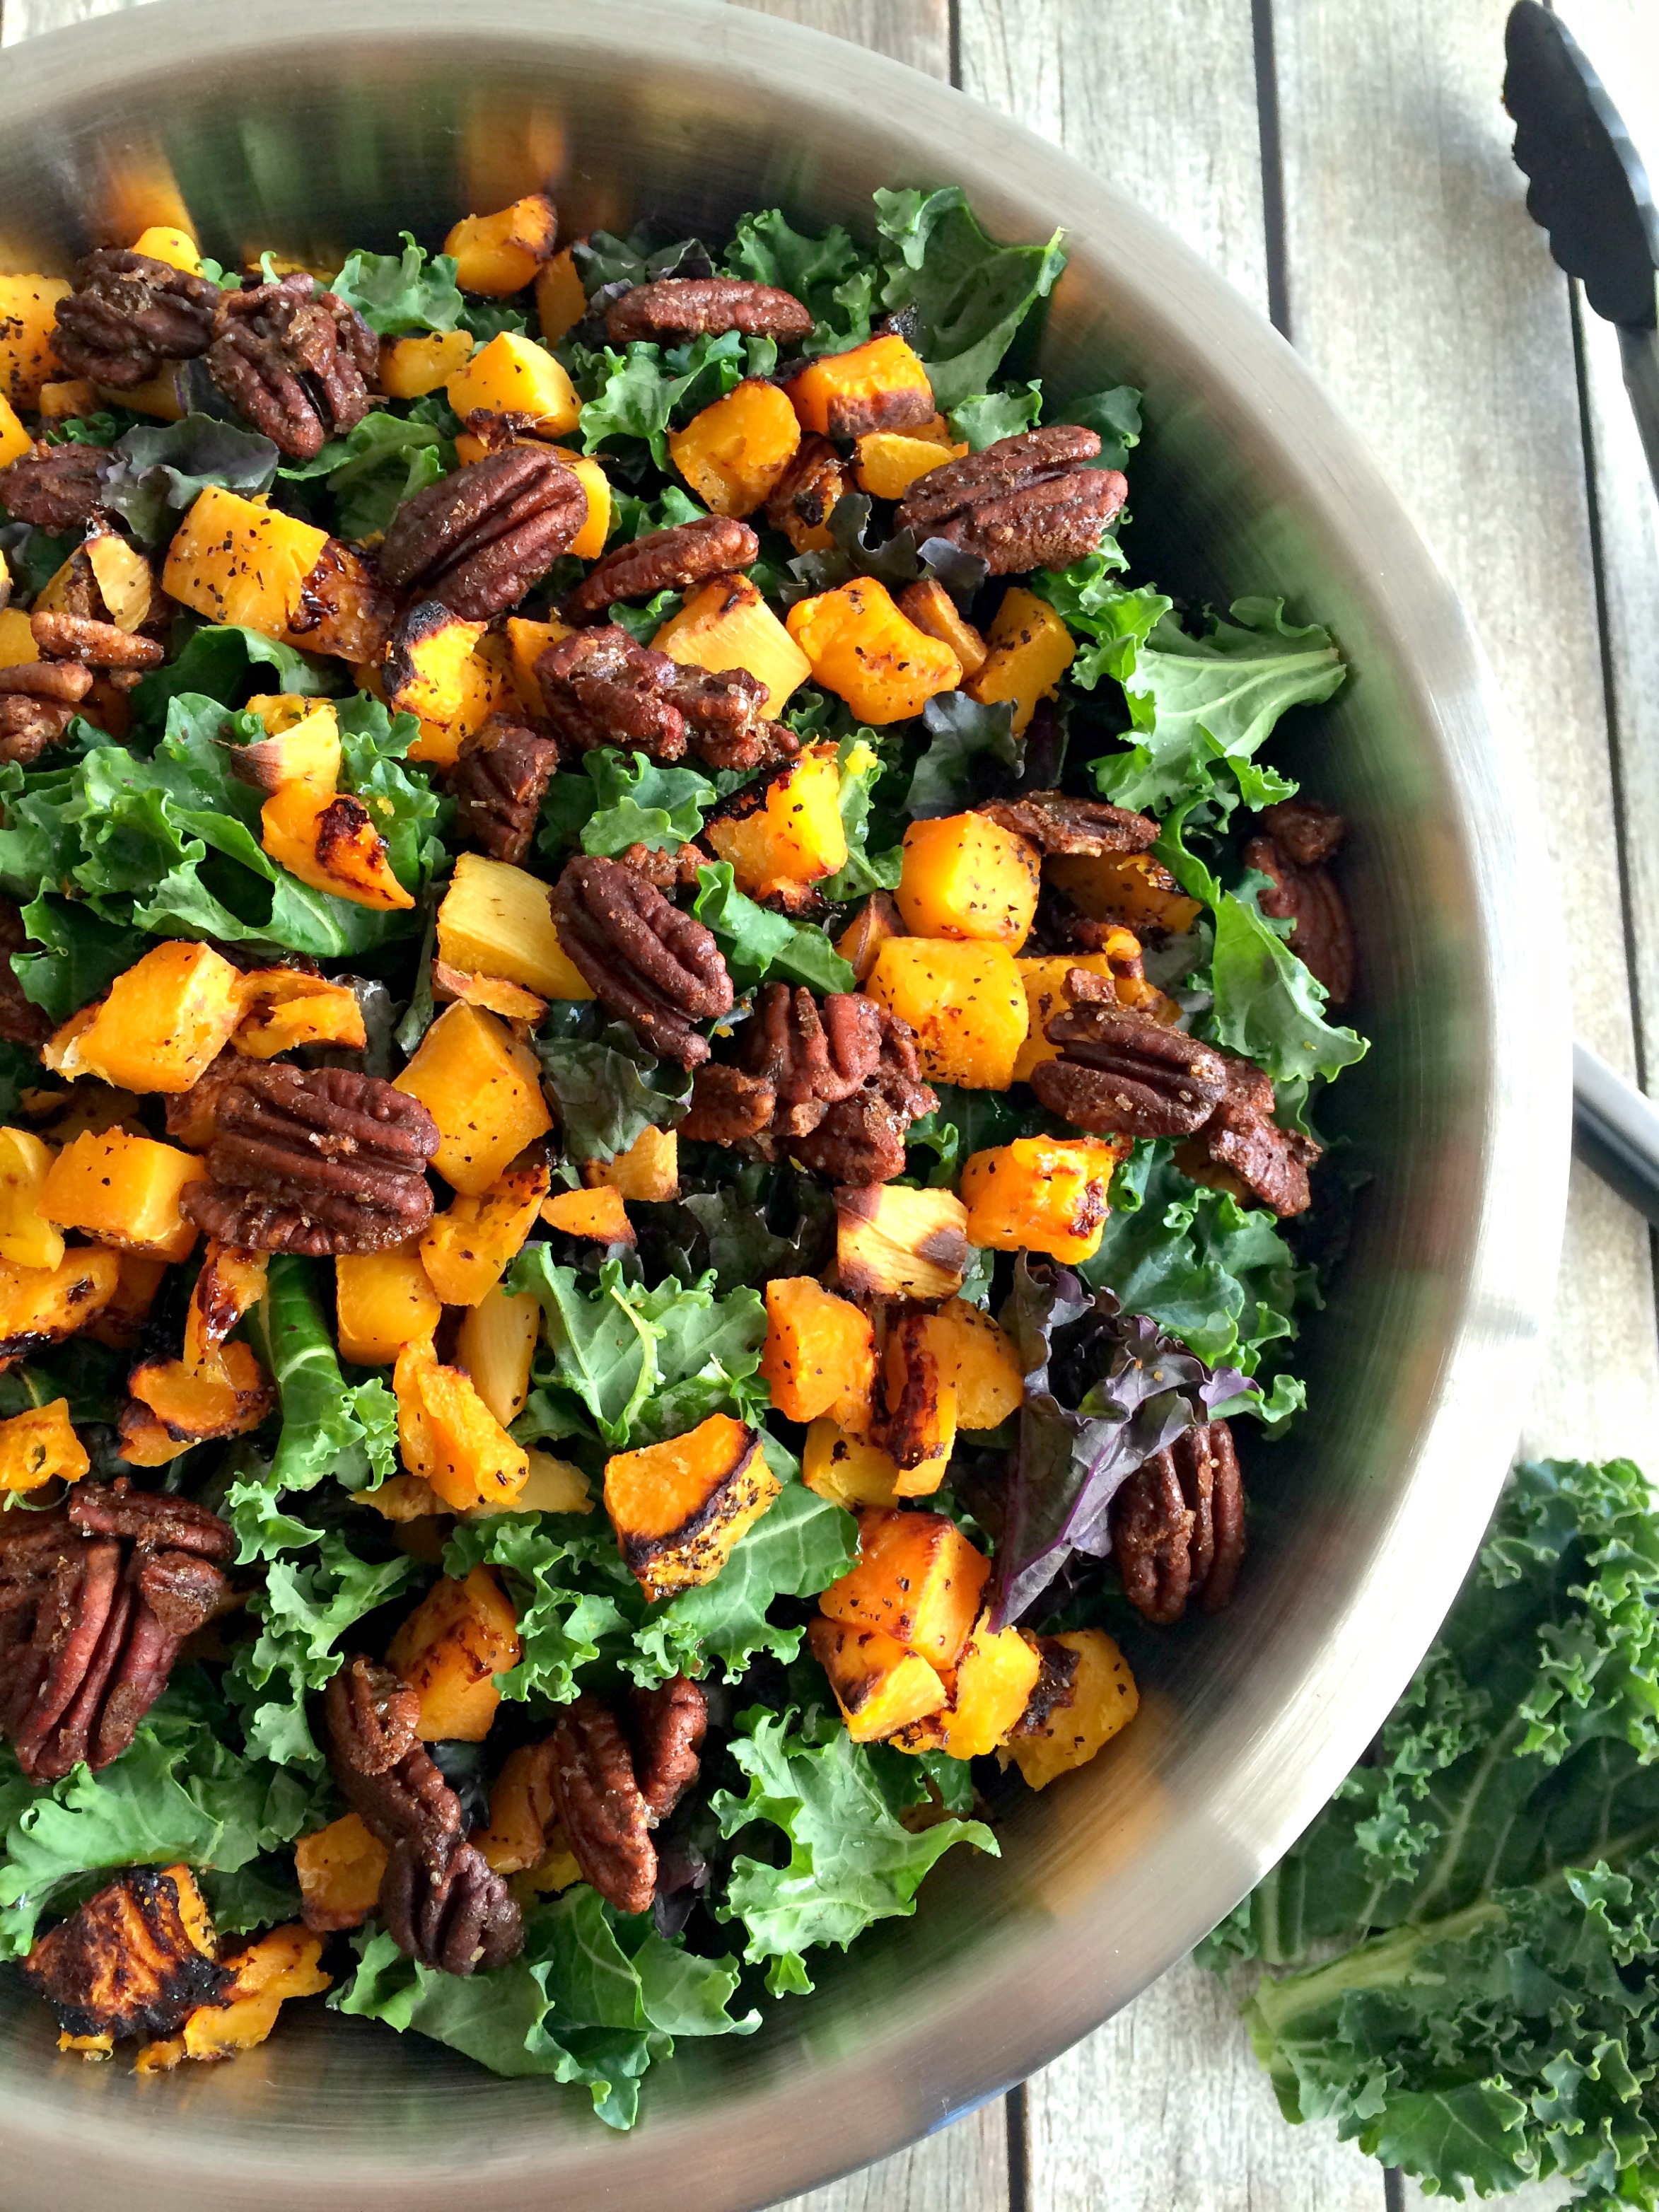 Winter Kale Butternut Squash Salad With Candied Pecans